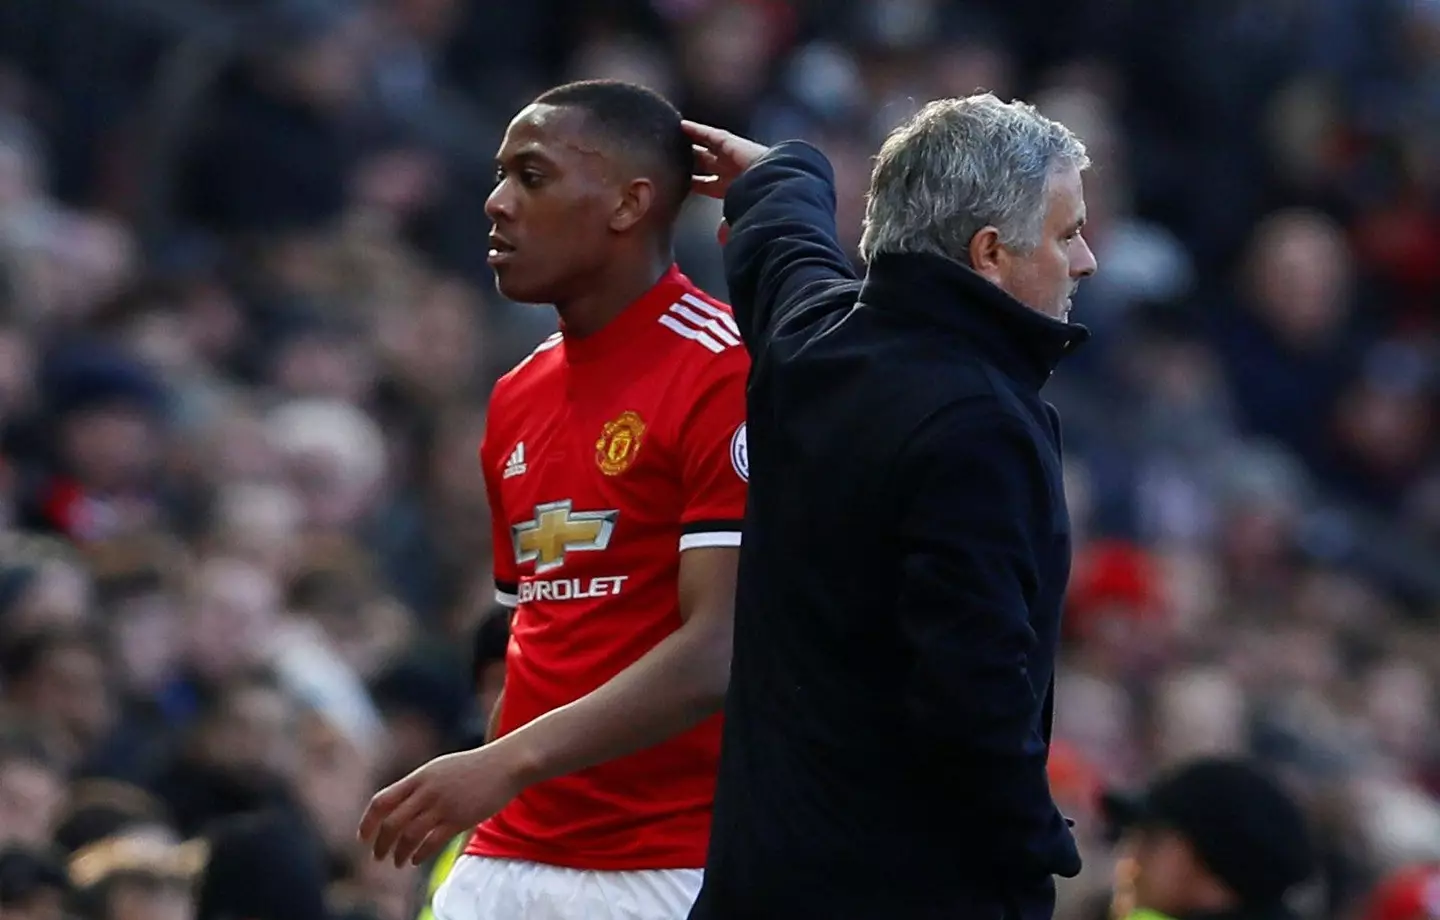 Martial and Mourinho had their issues. (Image